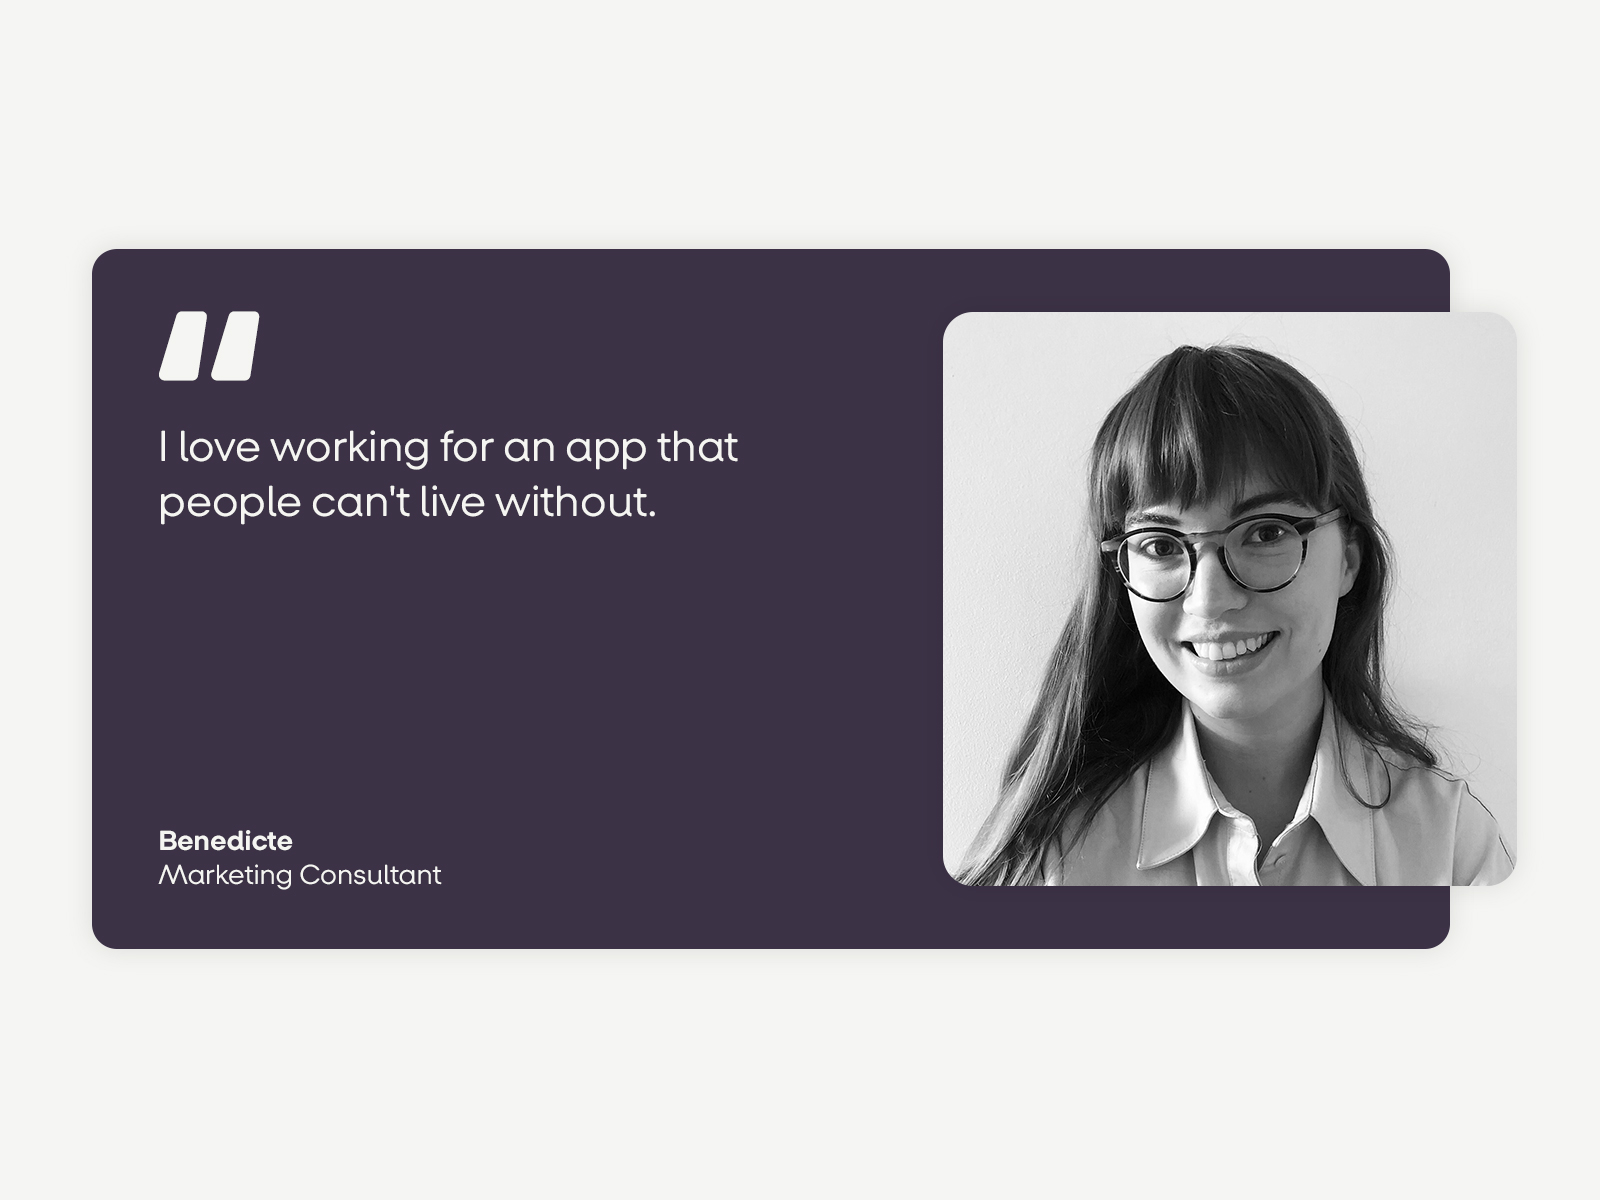  Quotes from the people behind MobilePay - learn more about us here